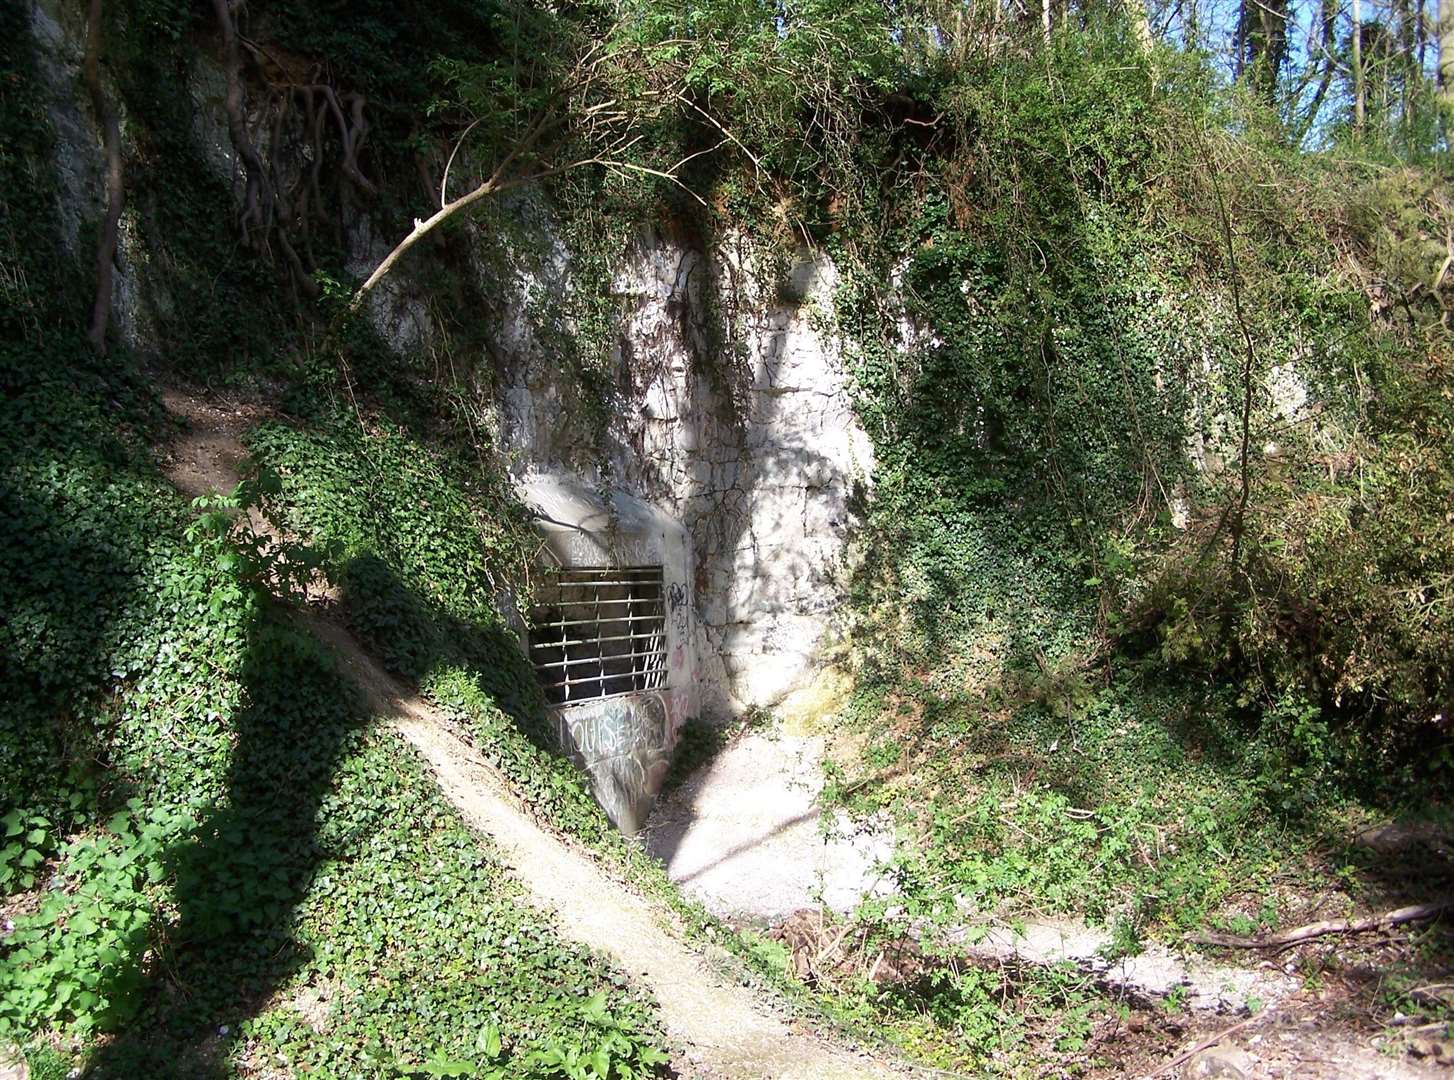 The mines have been closed off since 1974